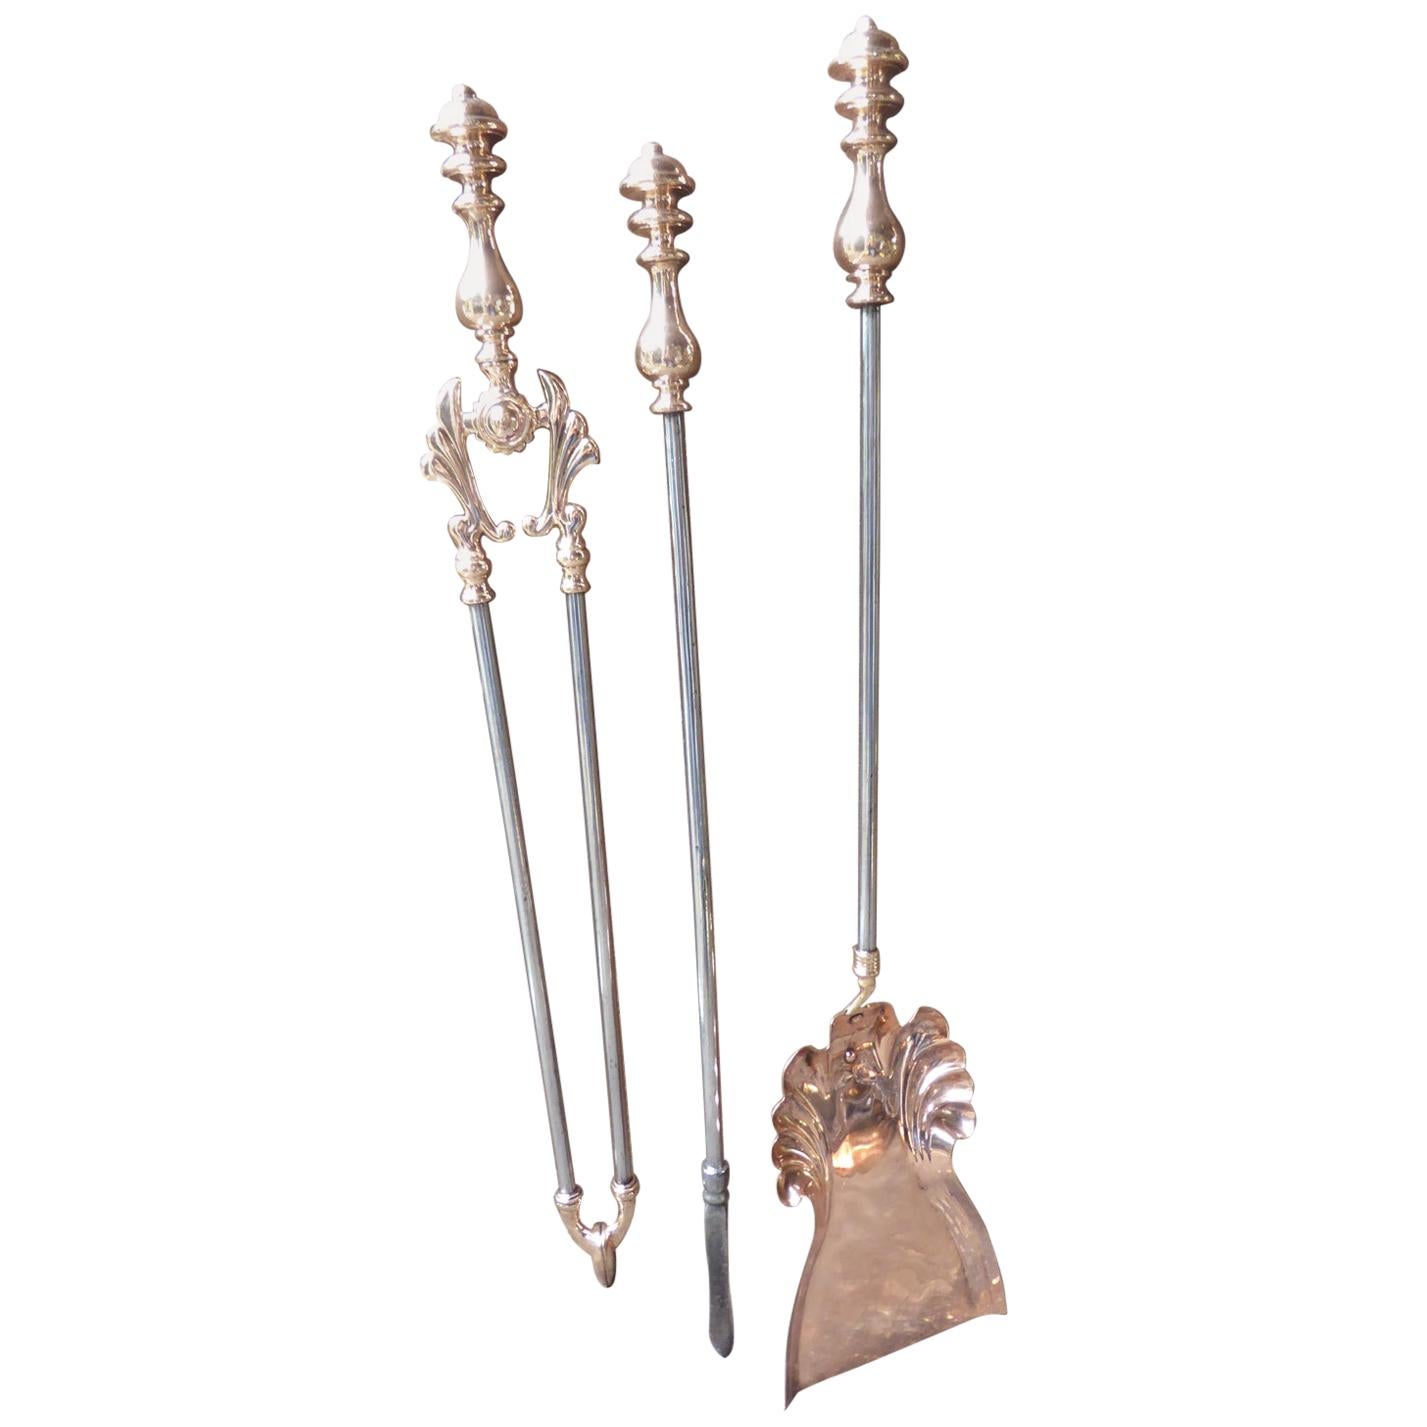 English Art Nouveau Fireplace Tools or Fire Tools, Early 20th Century For Sale